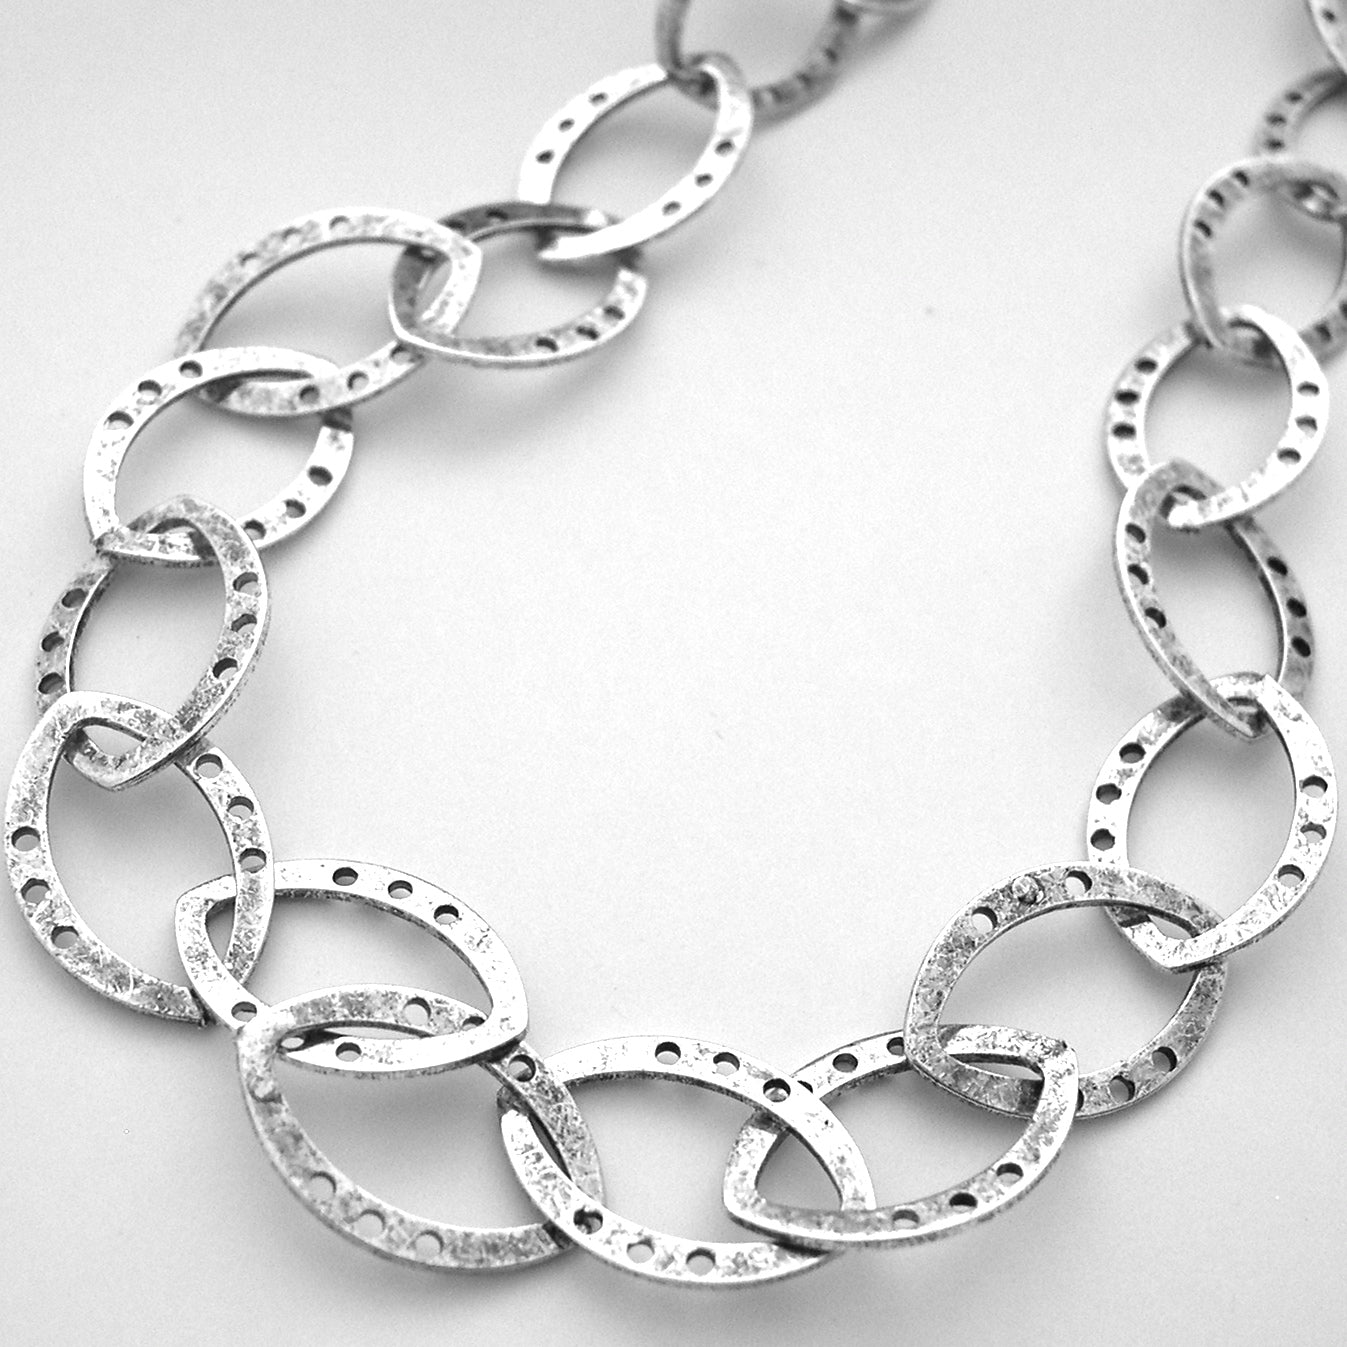 Antique Silver Drawn Flattened Oval Cable Chain, 10 foot spool